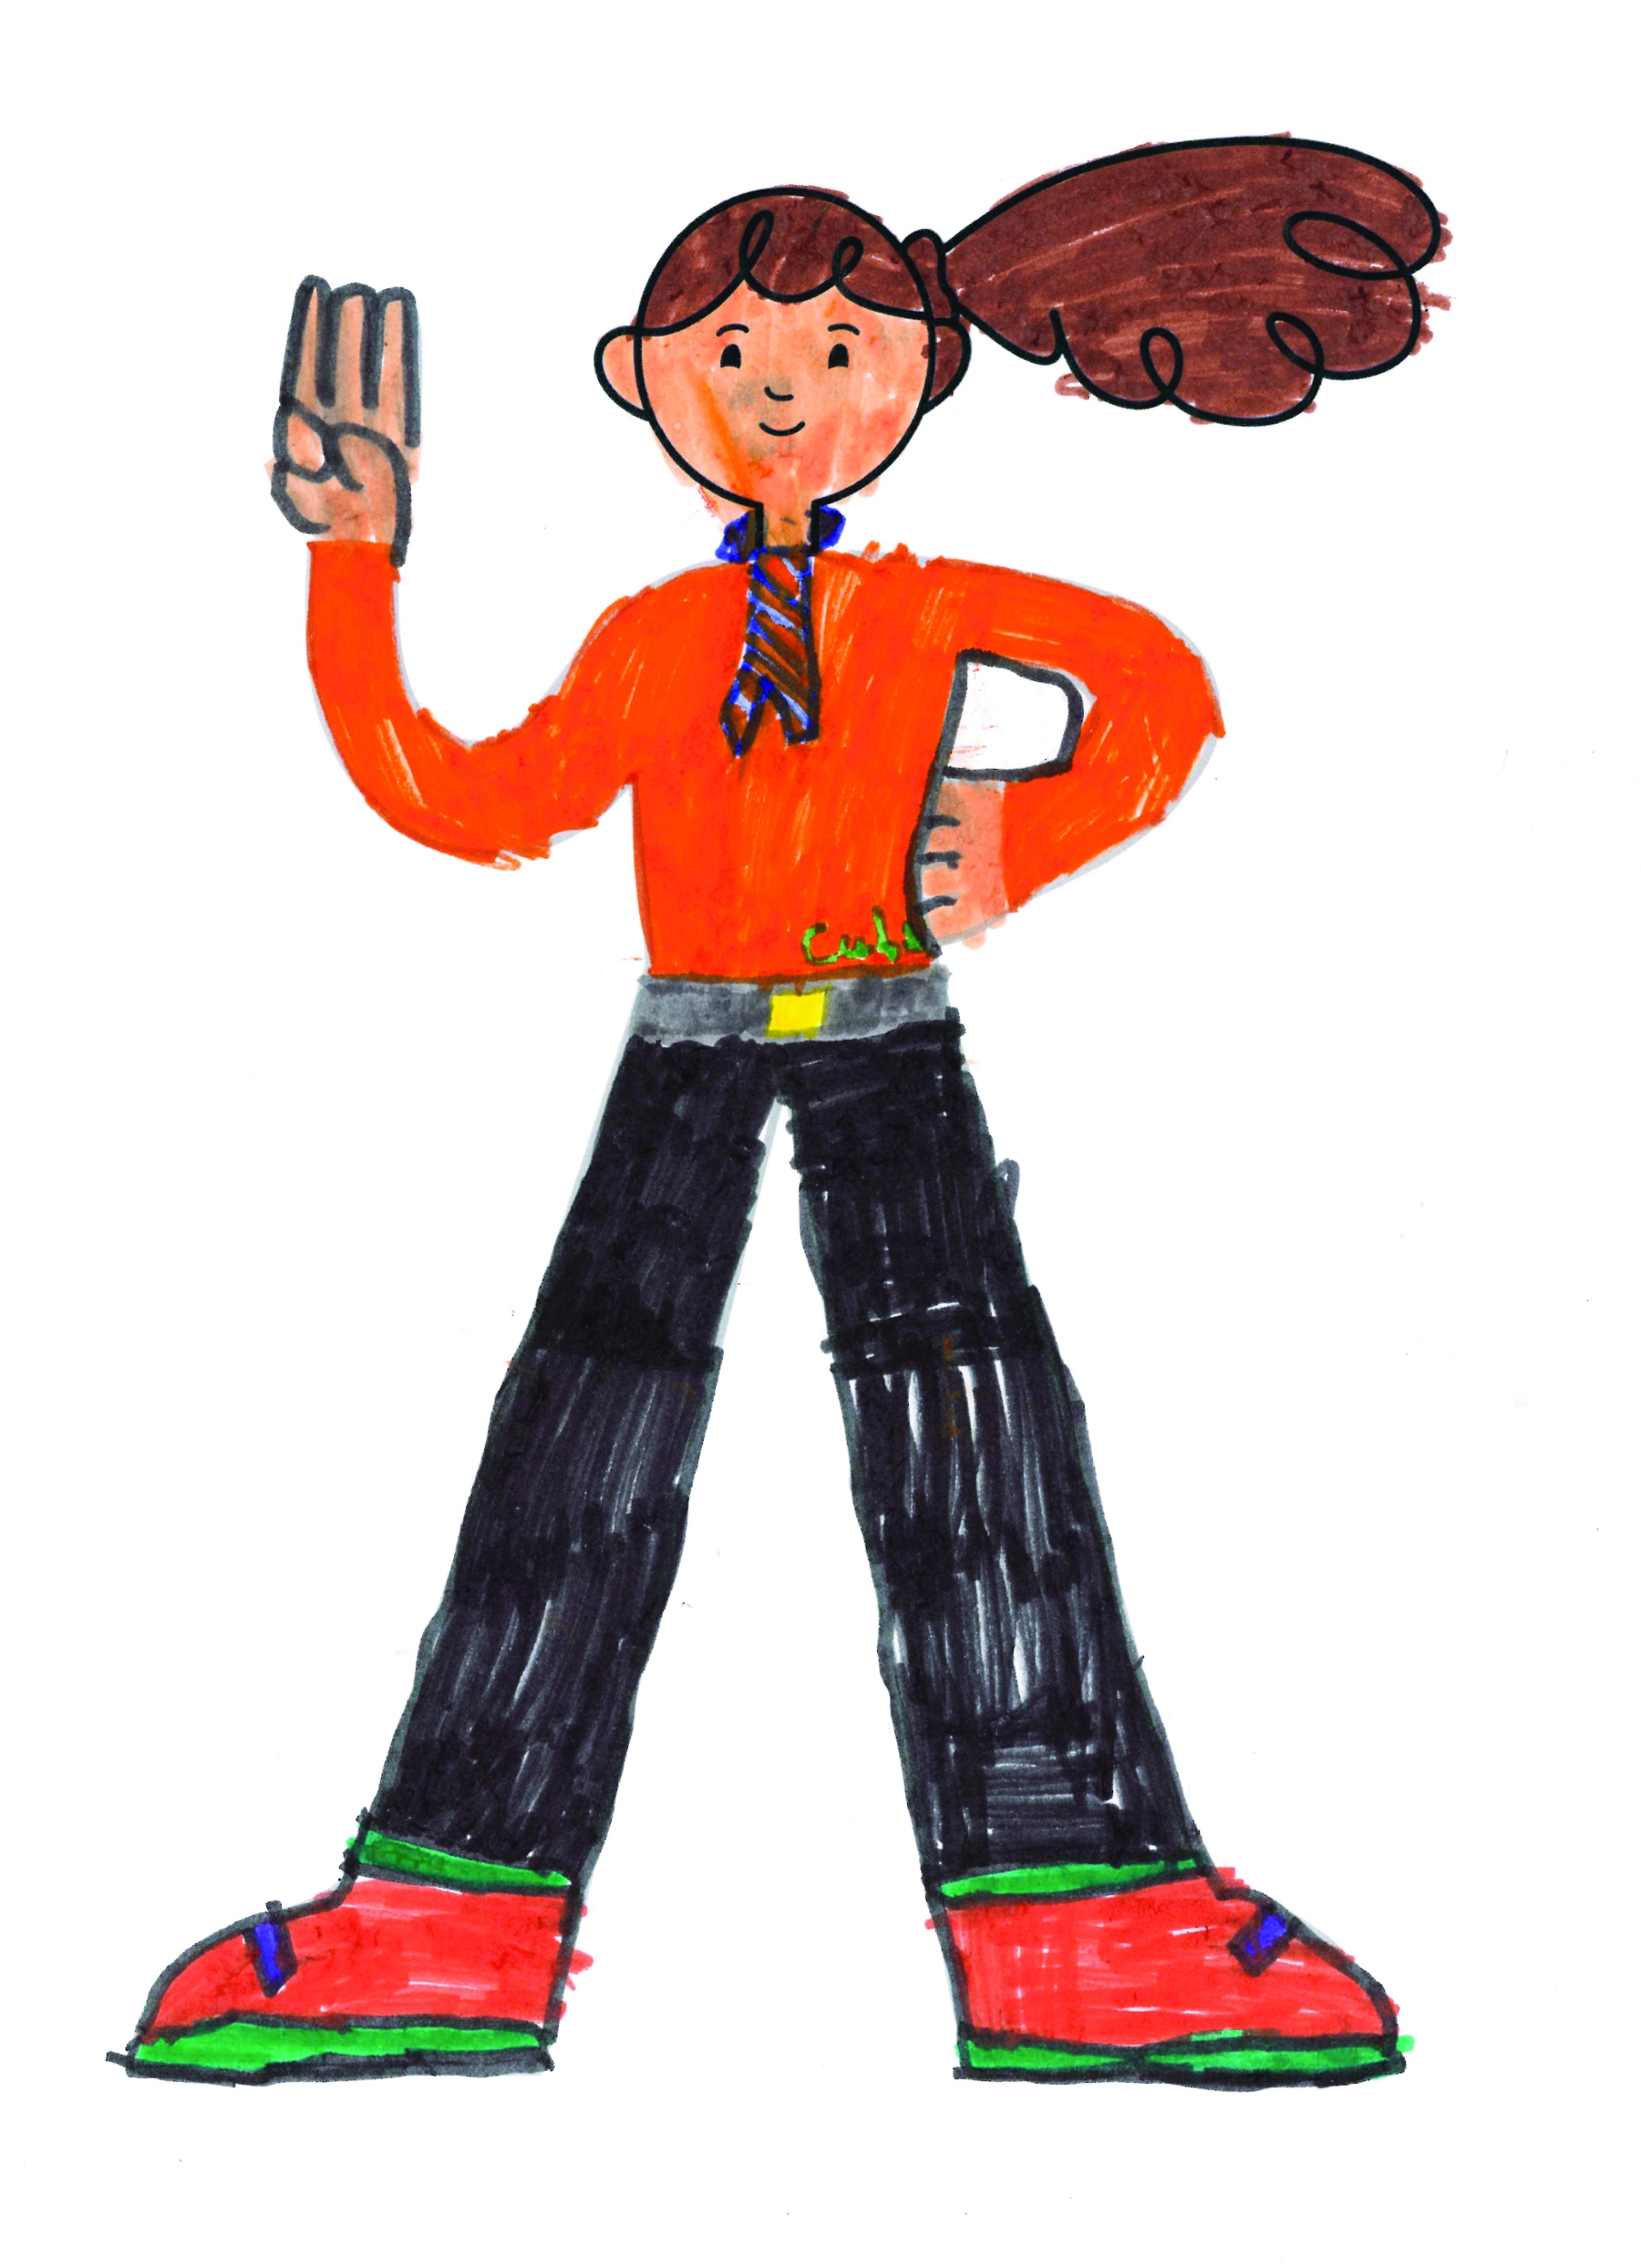 Scout with orange jumper, black trousers and orange shoes